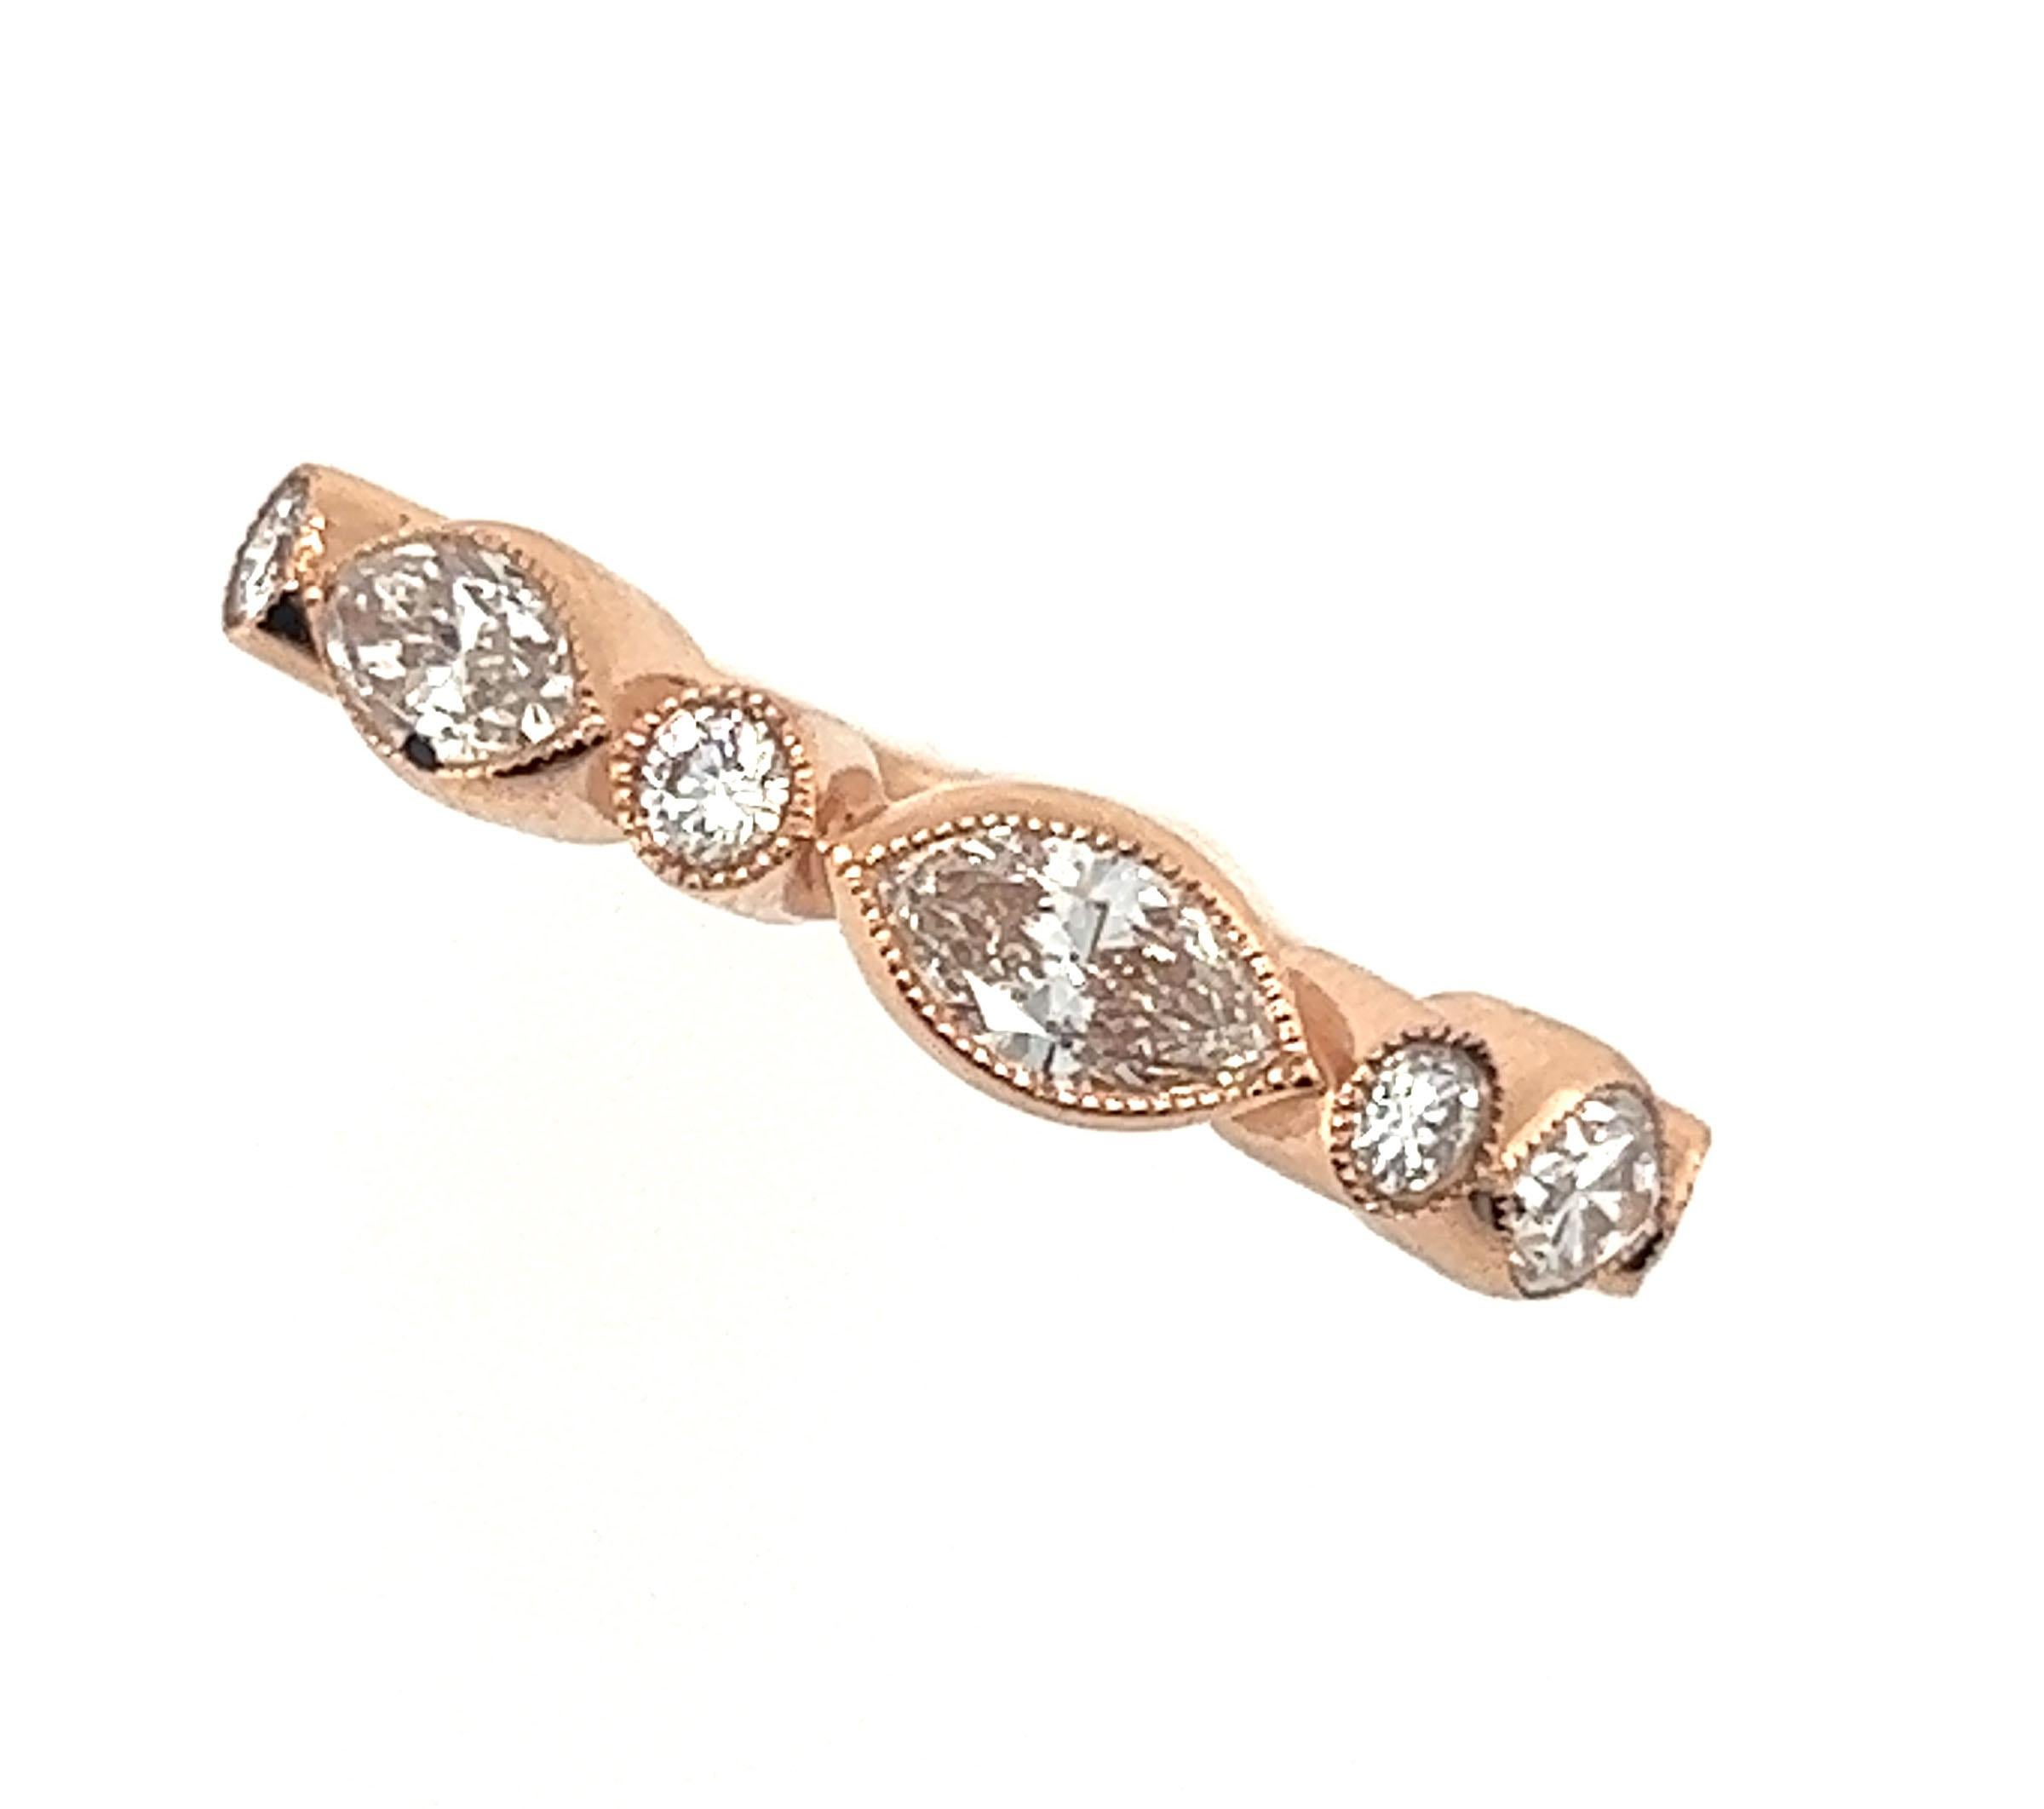 Diamond Anniversary Band 1.32ct 14K Rose Gold Wedding Ring


Solid 14K Rose Gold 

100% Natural Diamonds

1.32 Carat Diamond Weight

Great Band to Stack

Matches Any Engagement Ring 

Perfect for a Birthday or Anniversary Gift

Brand New


Diamonds